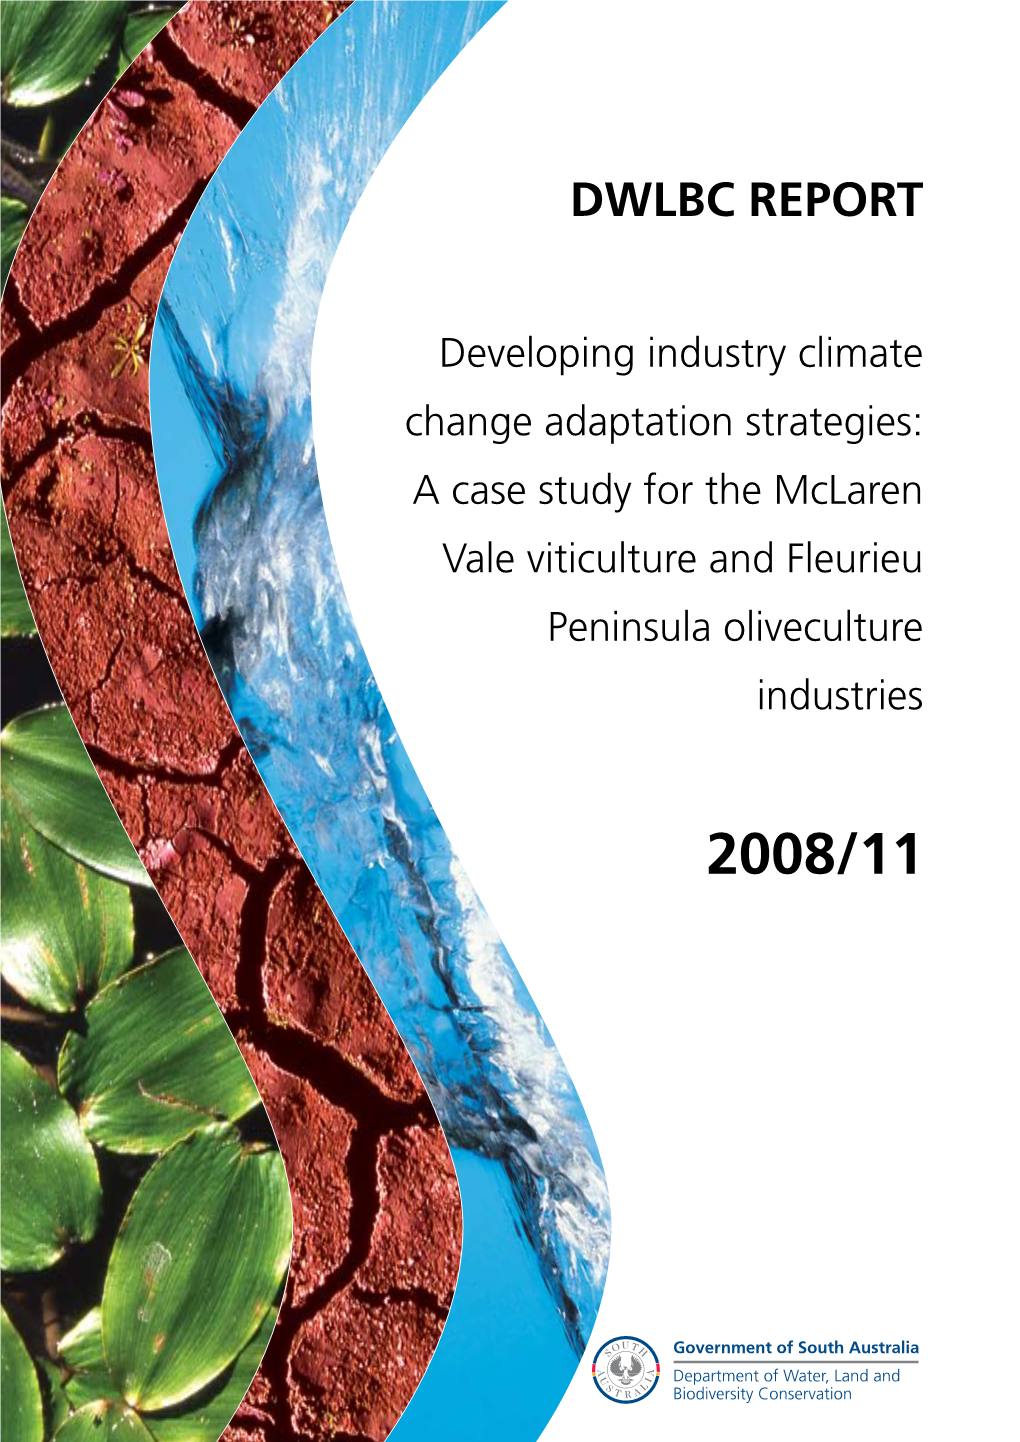 Developing Industry Climate Change Adaptation Strategies: a Case Study for the Mclaren Vale Viticulture and Fleurieu Peninsula Oliveculture Industries